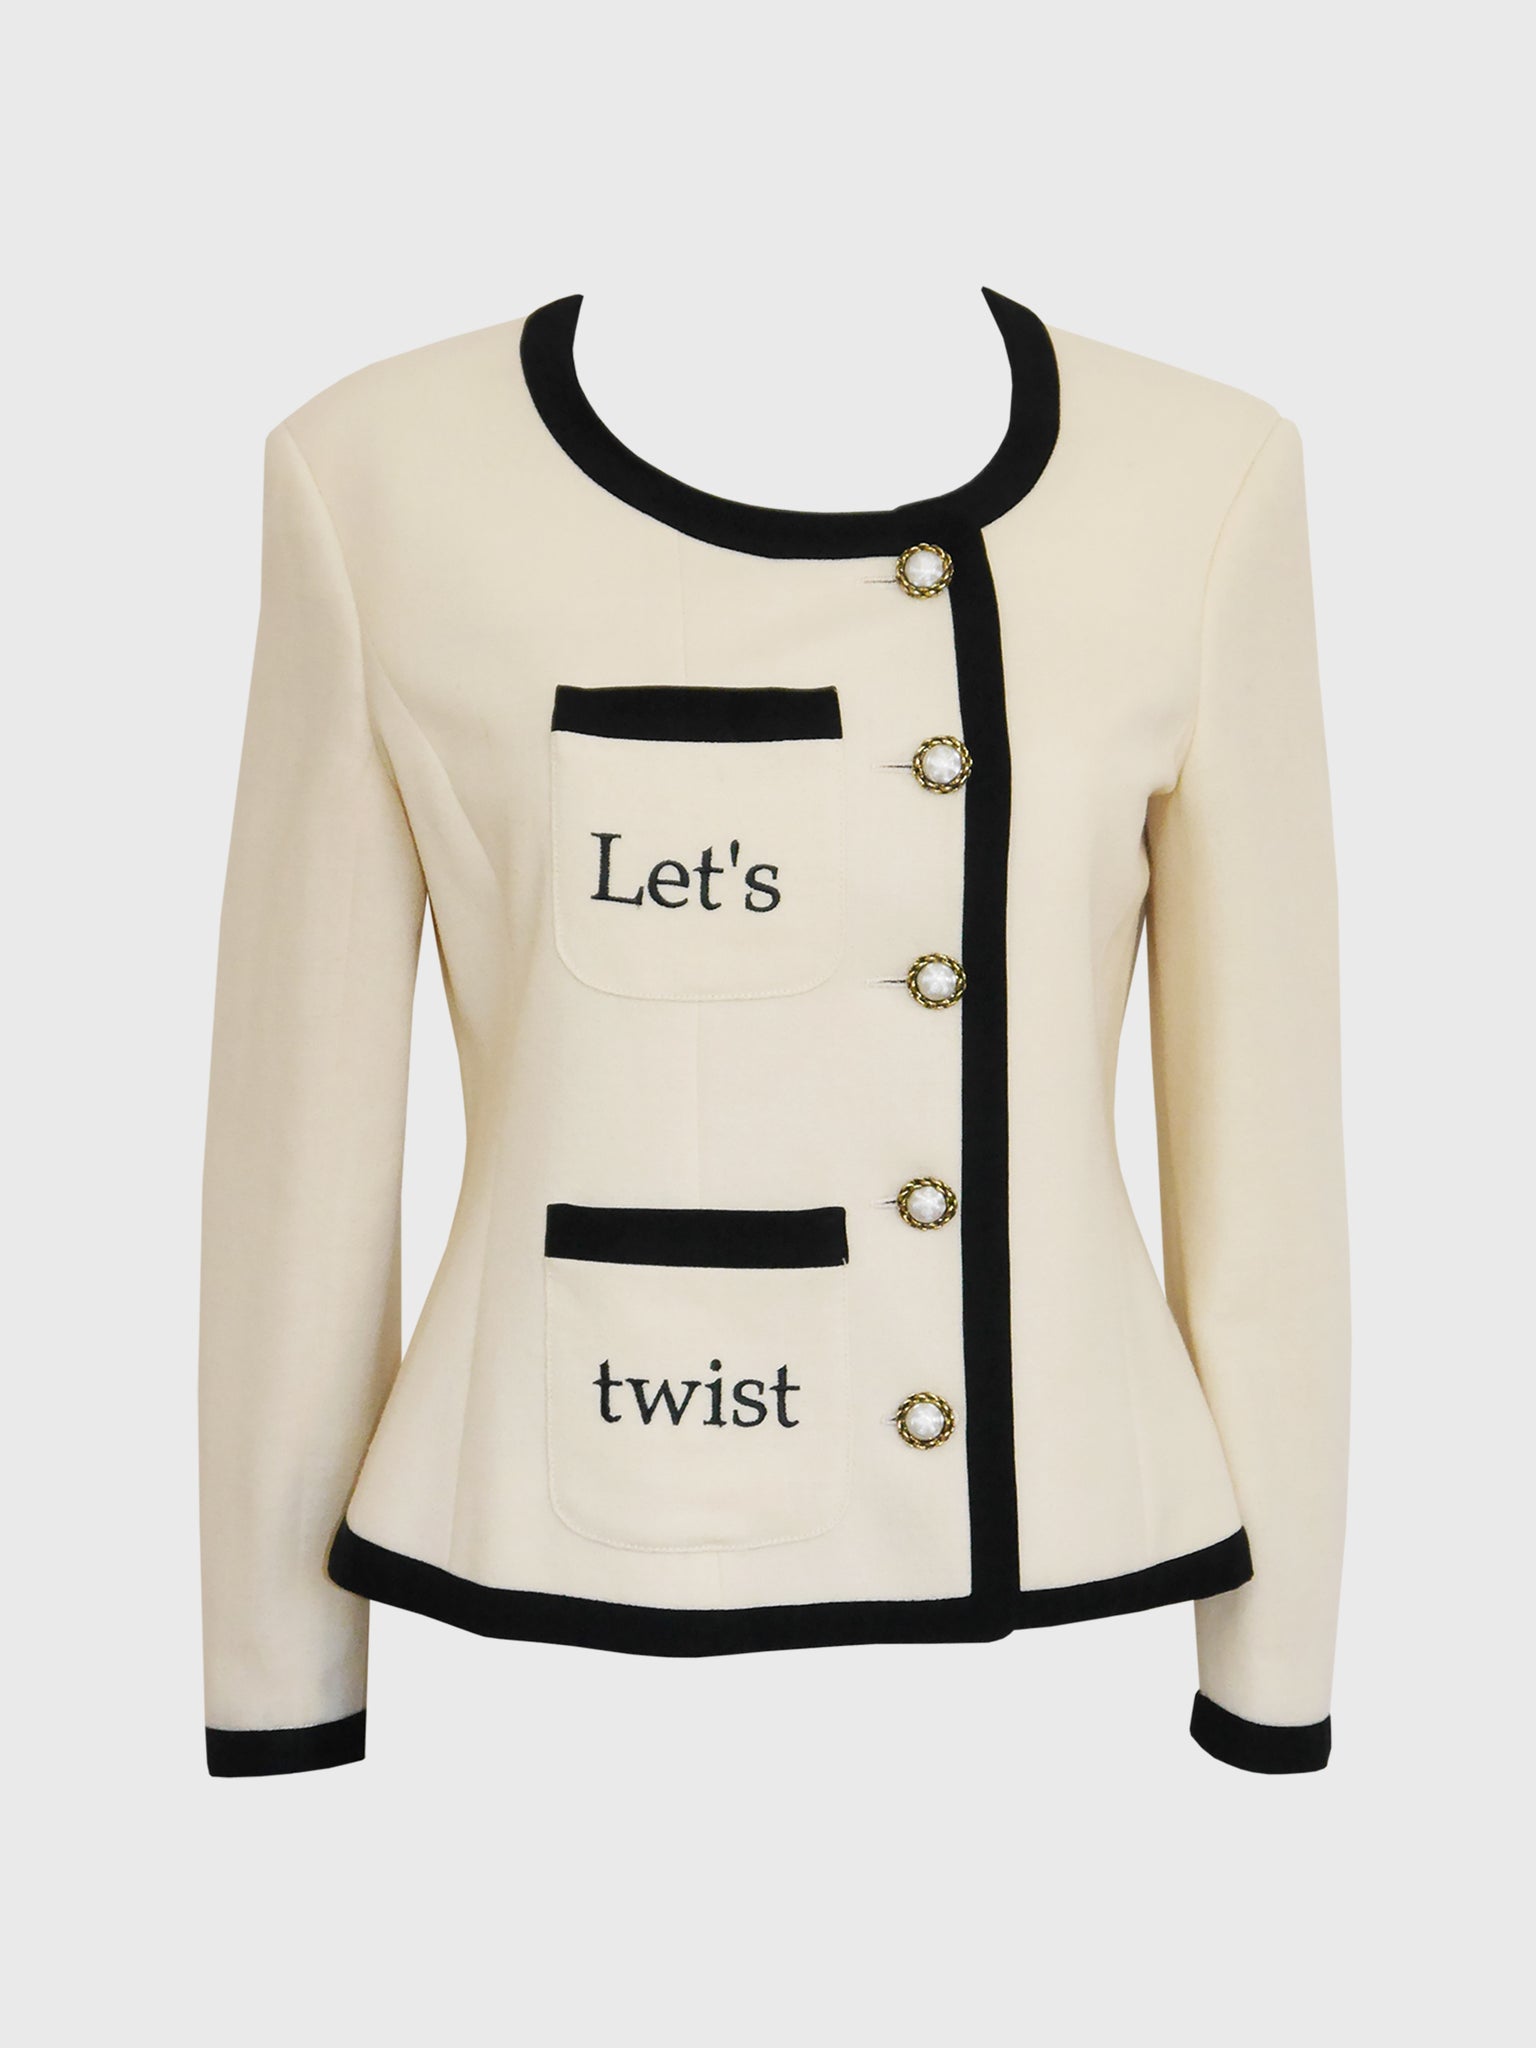 MOSCHINO 1990s Vintage "Let's Twist Again" Jacket